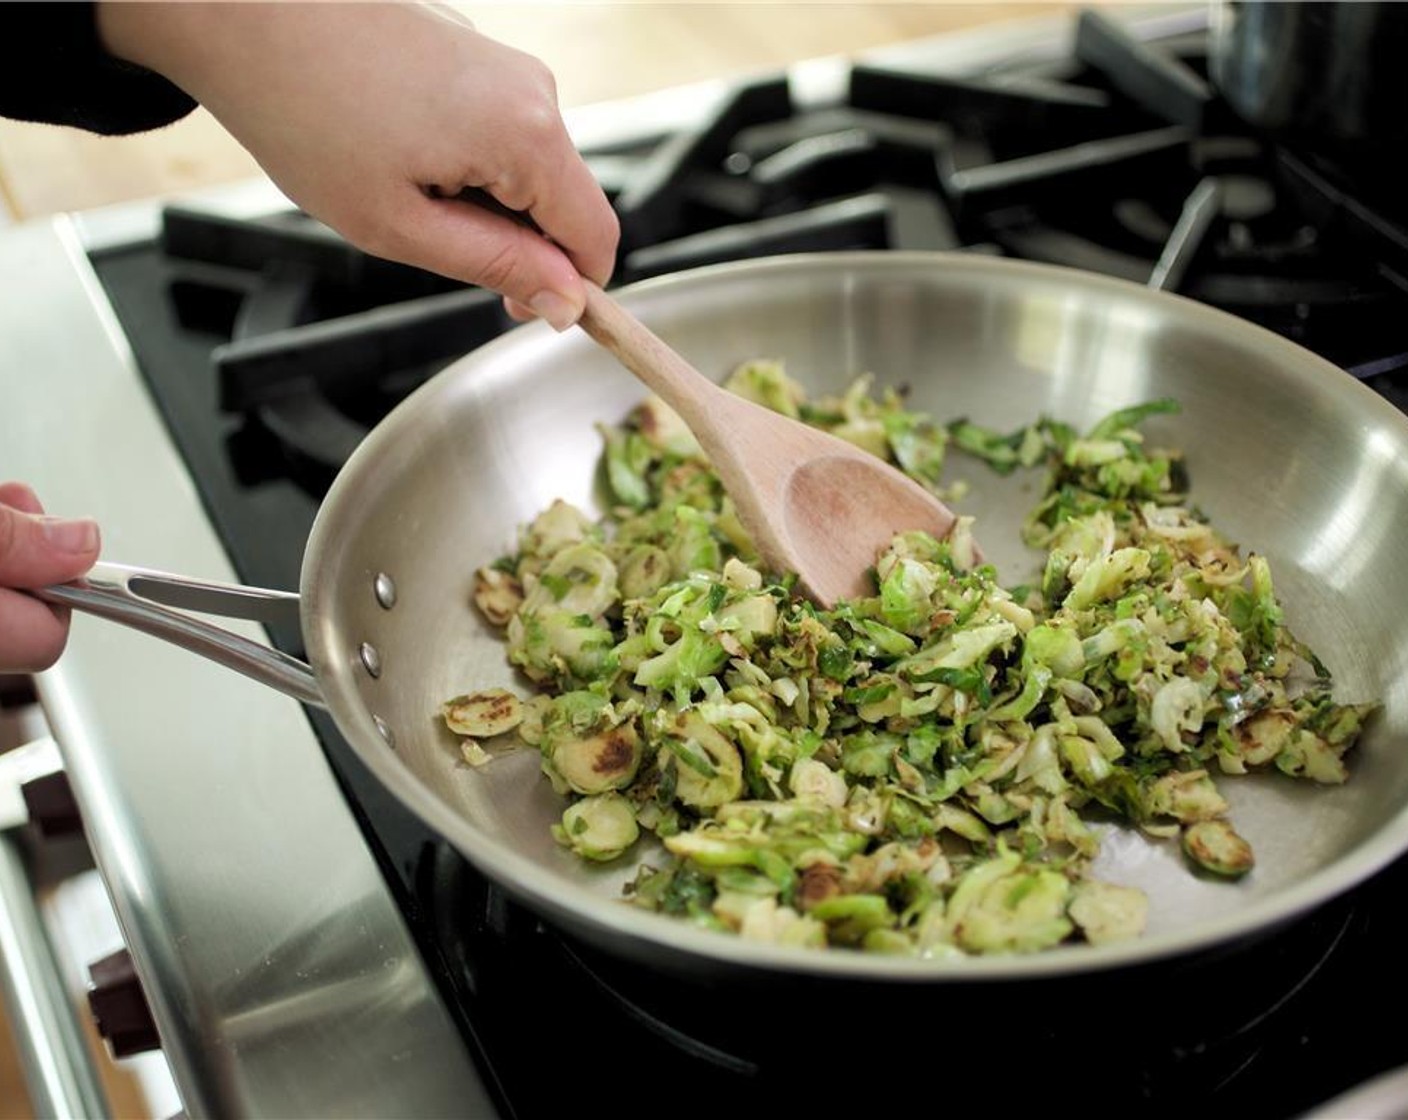 step 6 Heat a medium saute pan over medium-high heat, add Olive Oil (1 Tbsp). Once pan is hot add the Brussel sprouts and a pinch of salt and a pinch of pepper. Cook for 5 minutes, and set aside.